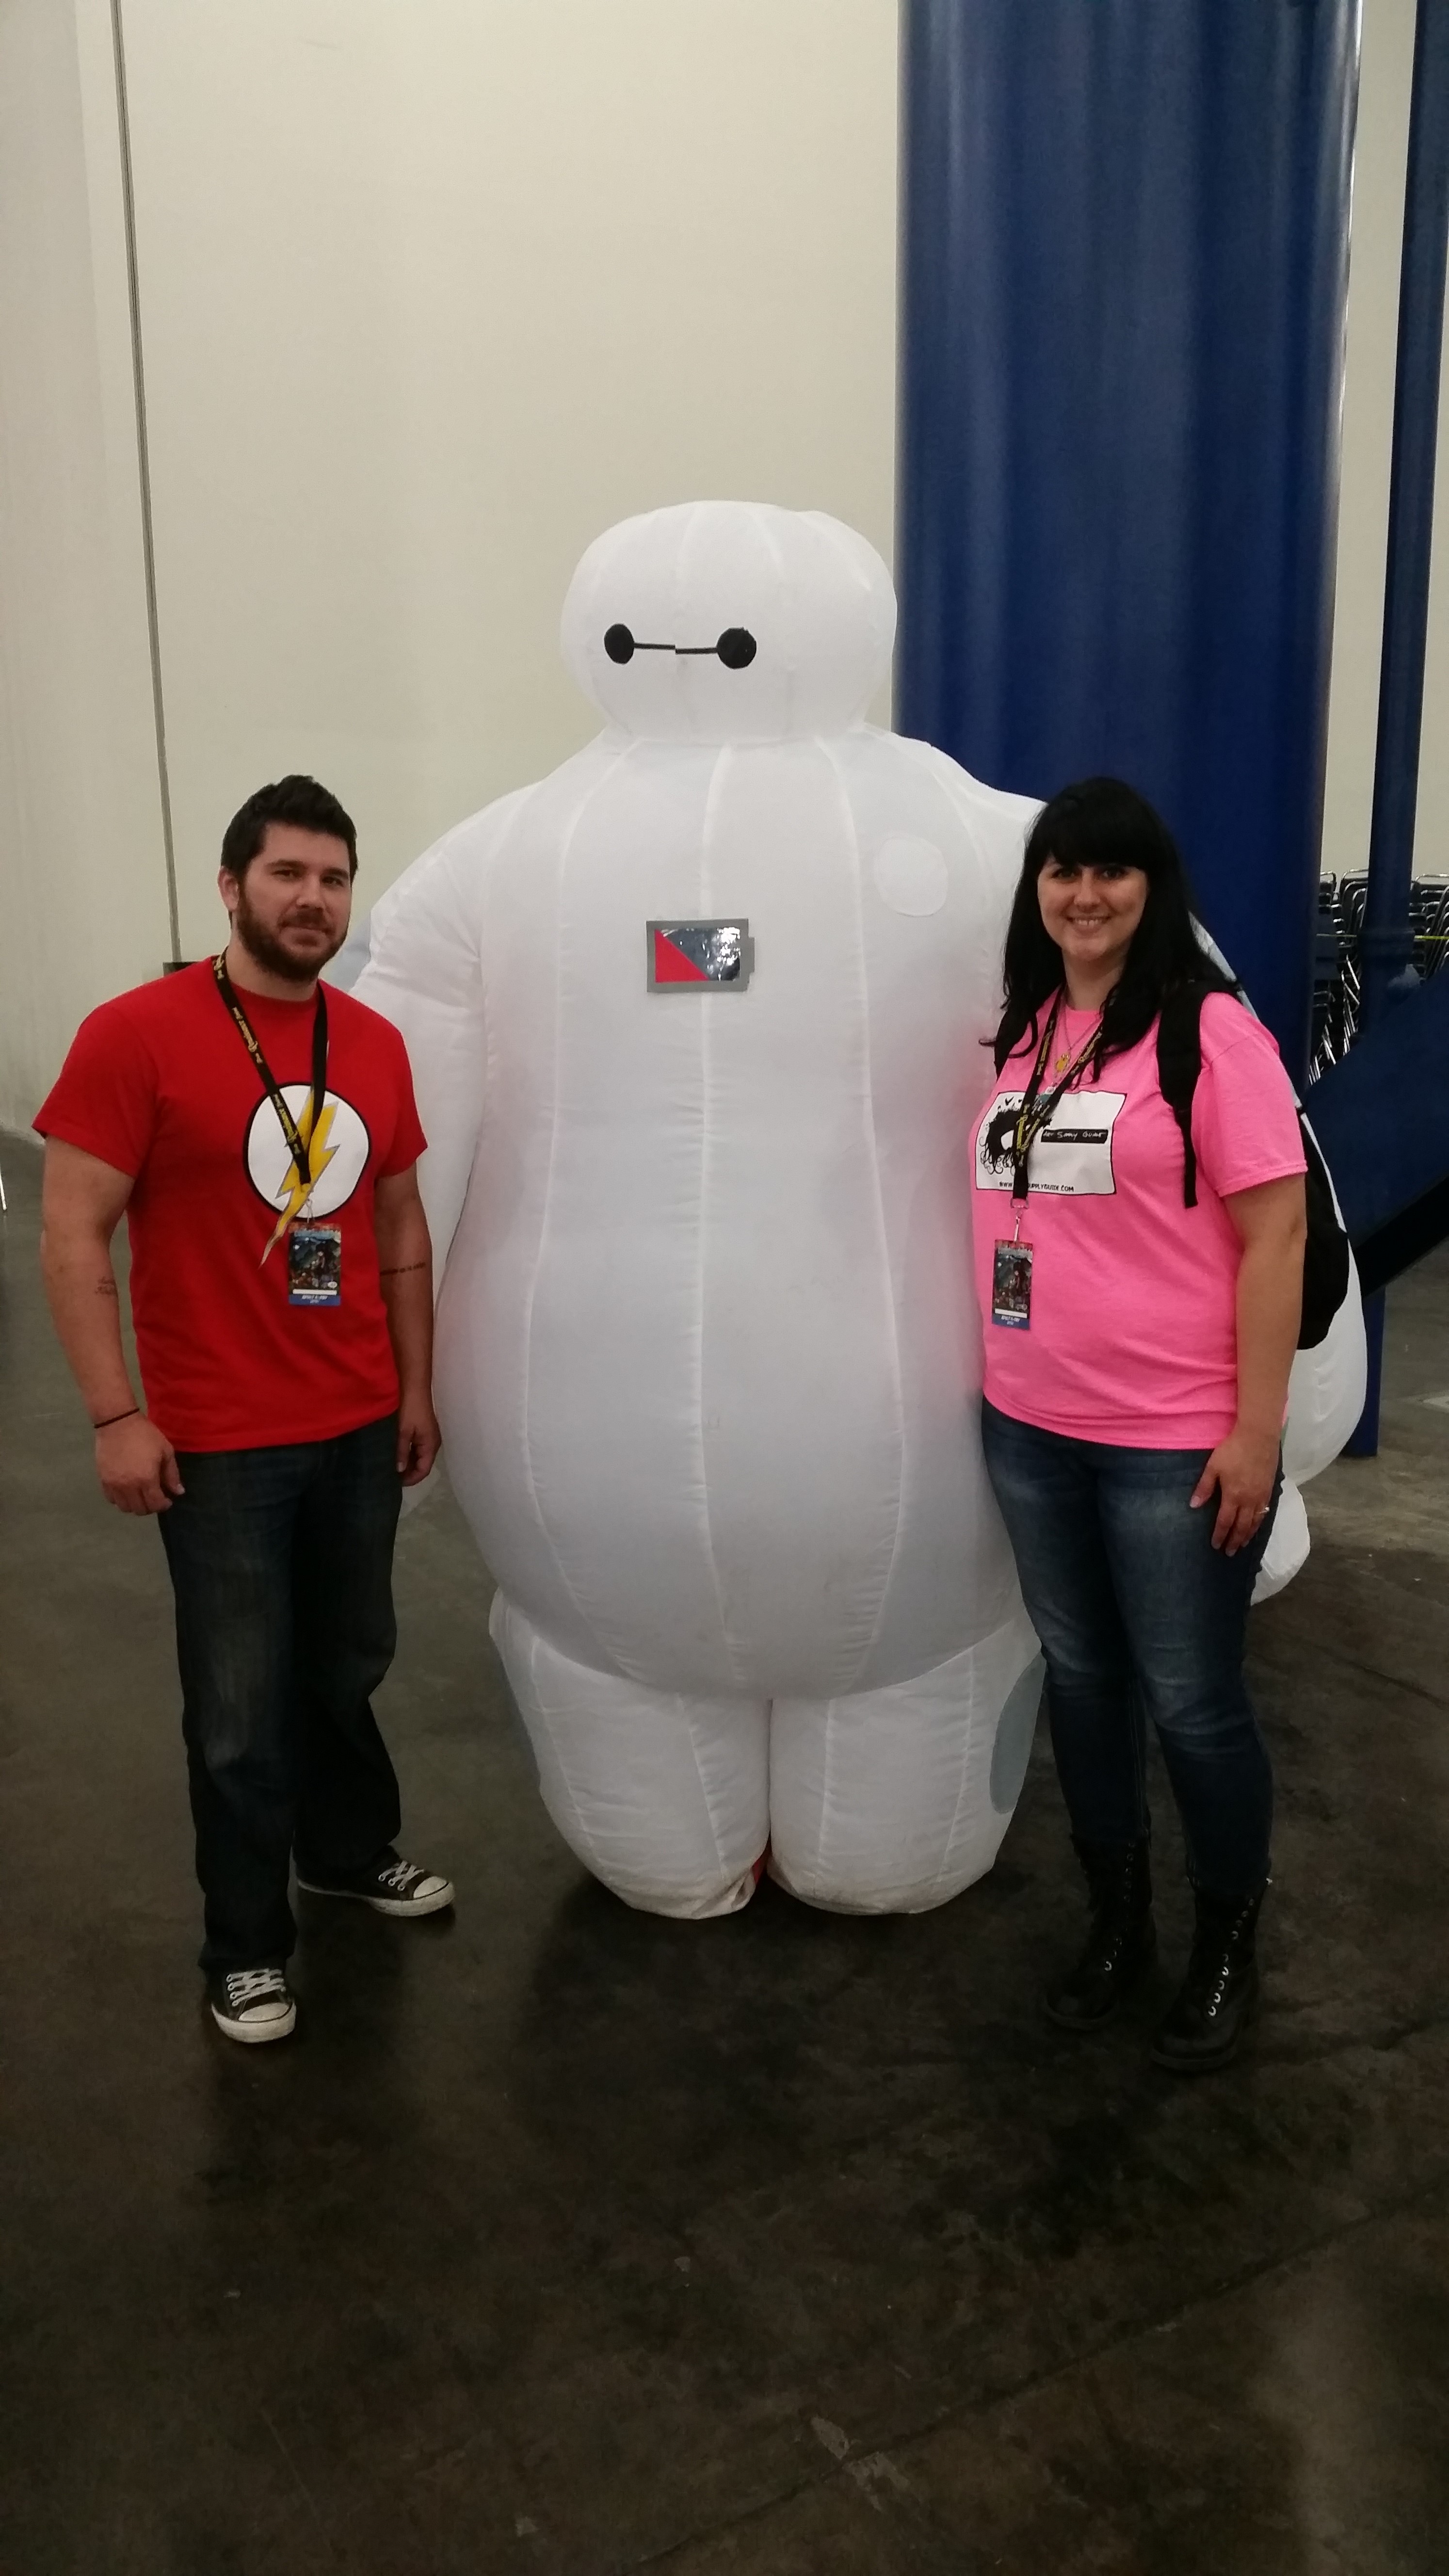 My husband Taylor and me with Bayman from Big Hero 6